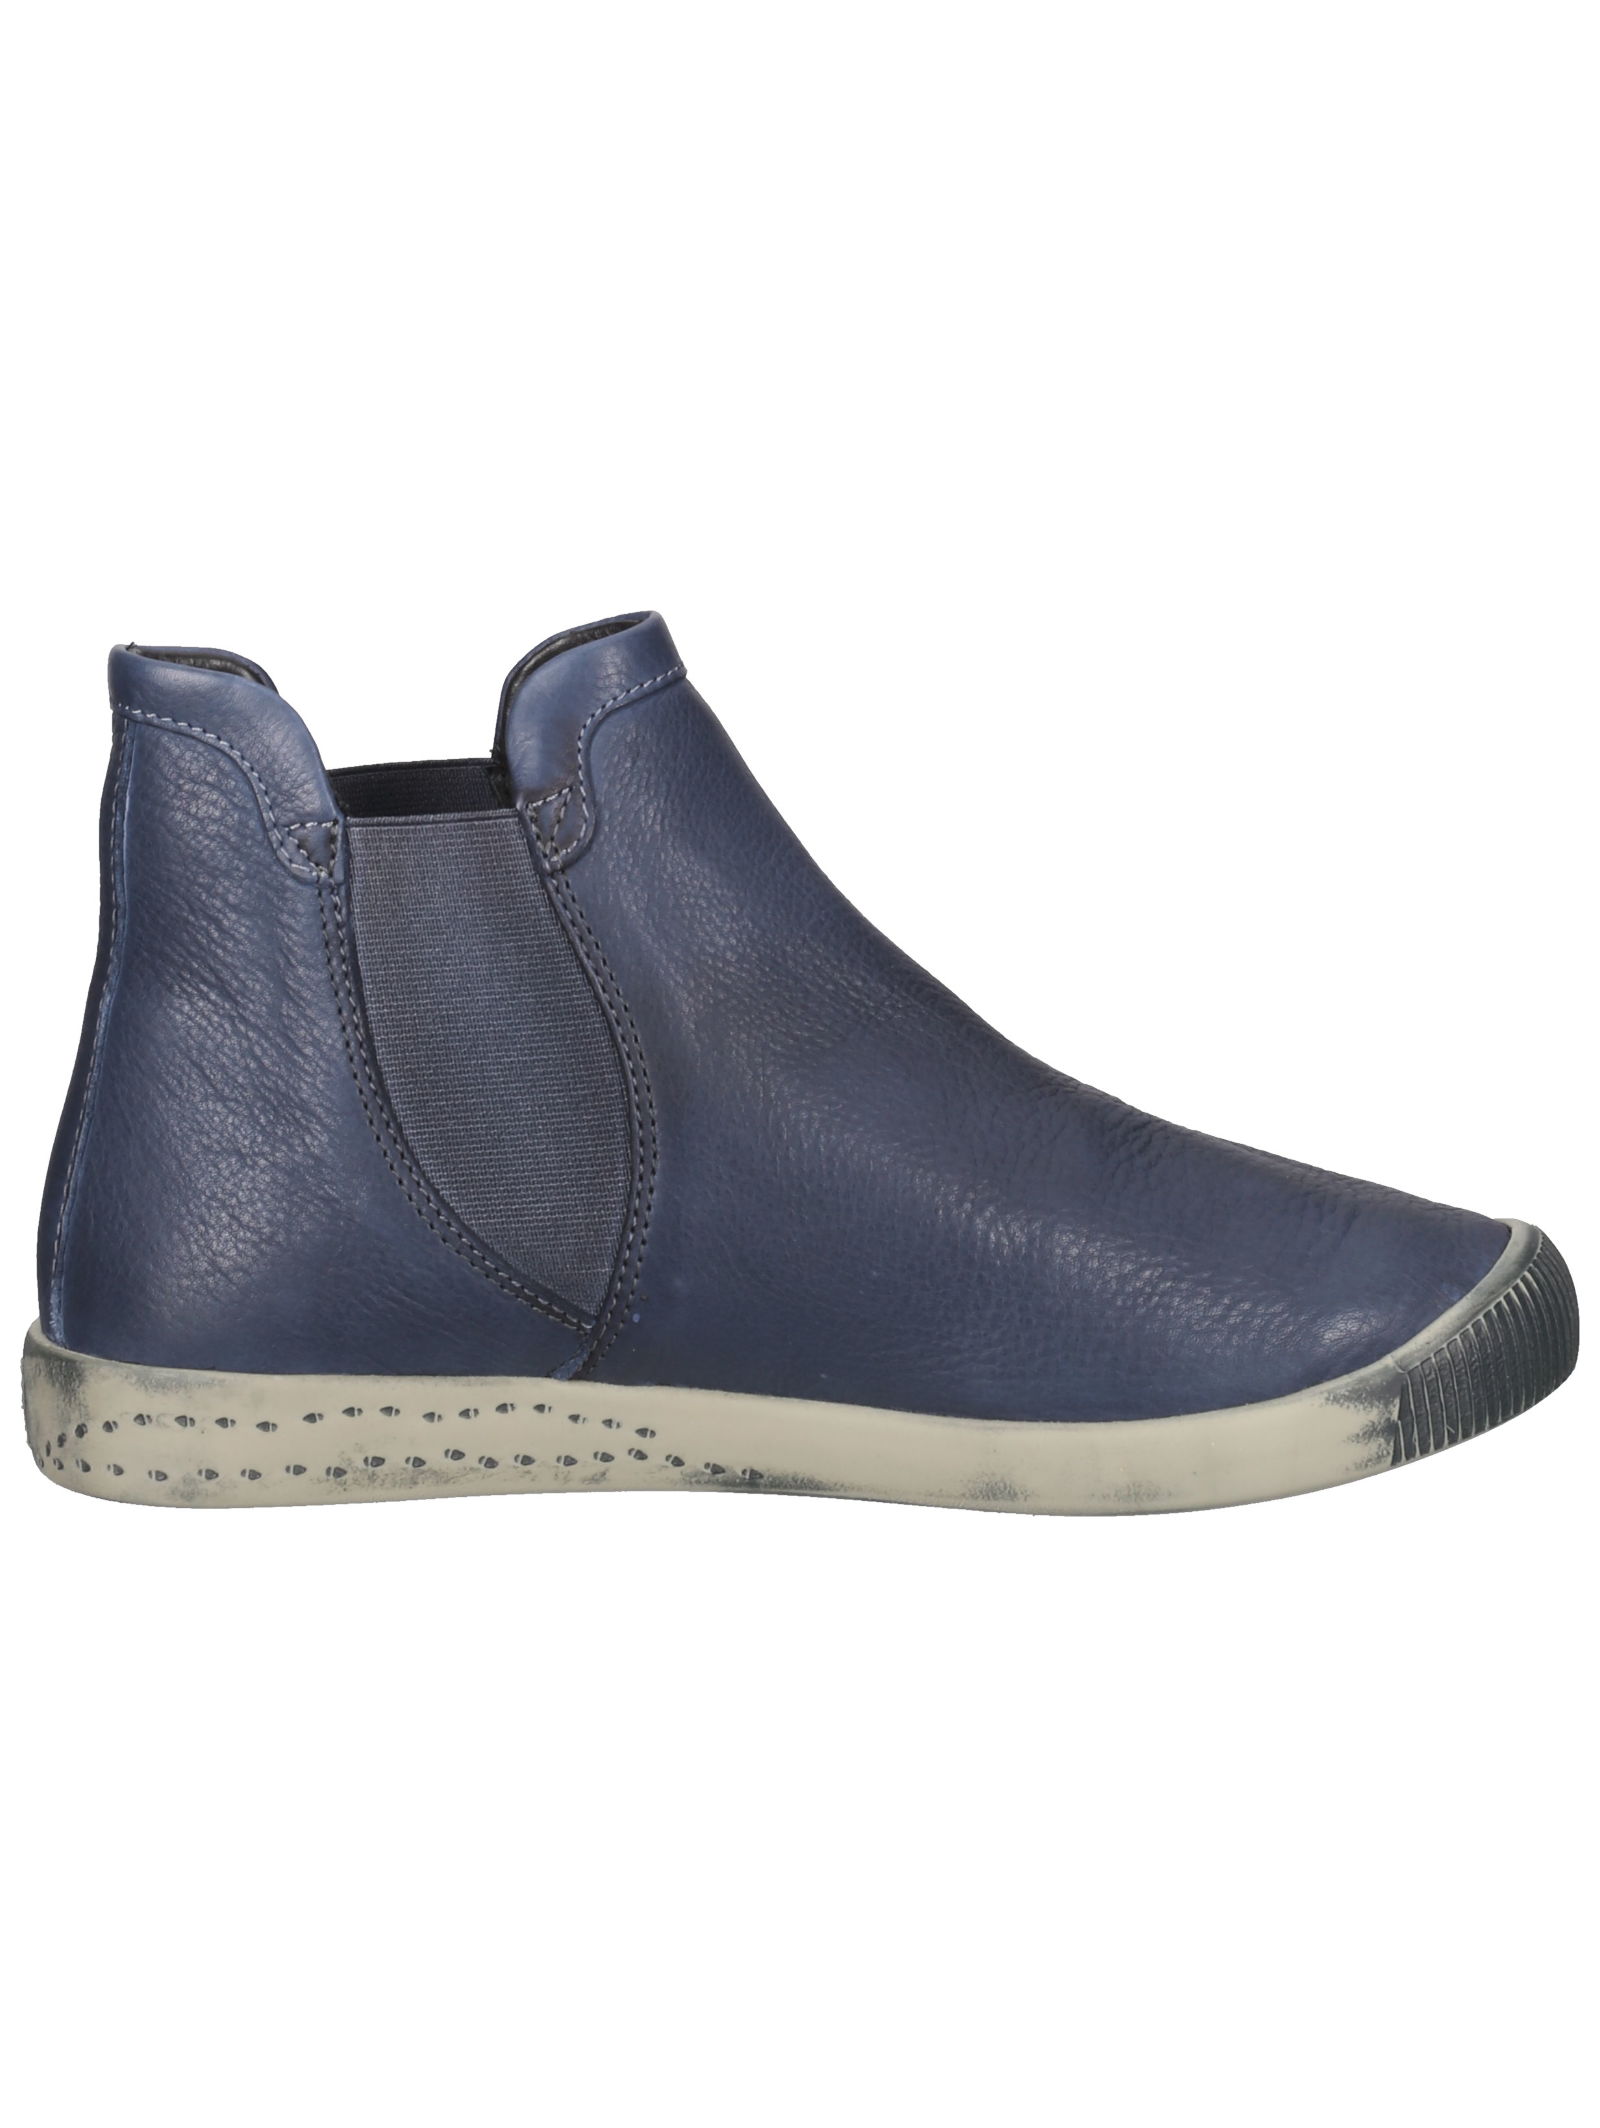 Softinos Chelsea Boots in Dunkelblau 